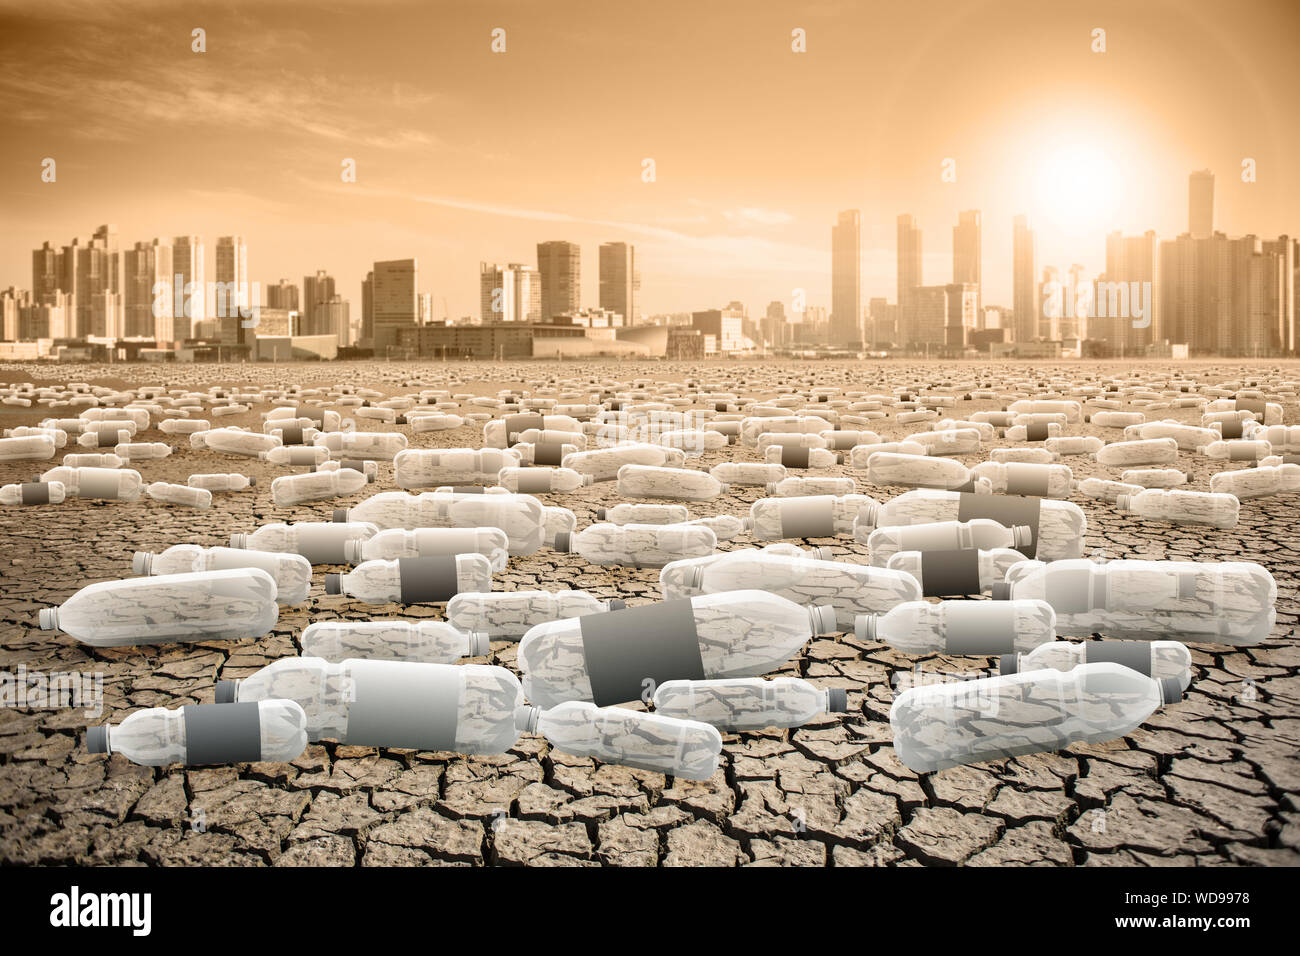 Plastic bottles in the desert. Post-apocalyptic landscape. Planet after the effects of plastic waste. Stock Photo